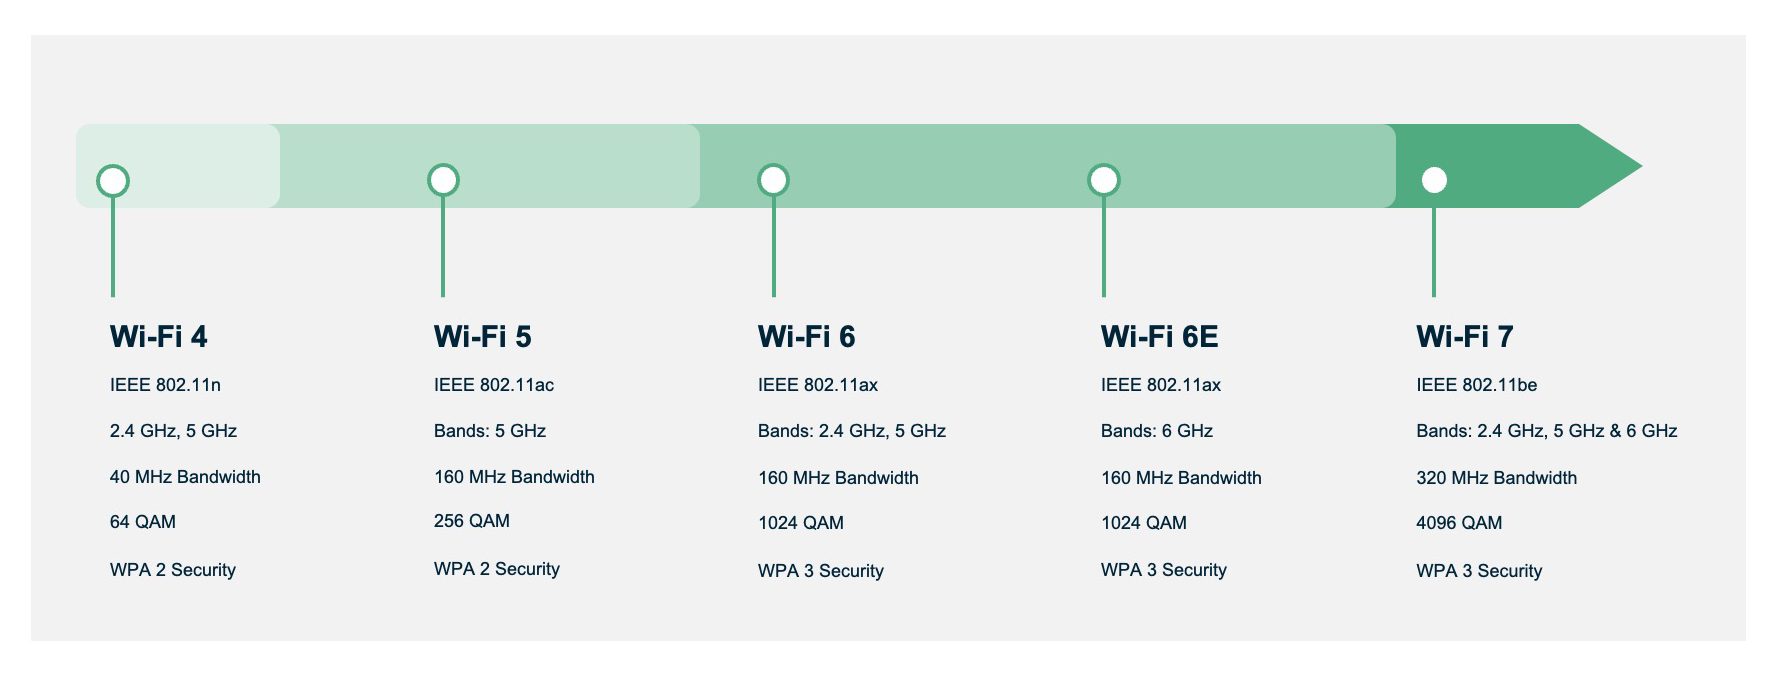 What Is Wi-Fi 7?